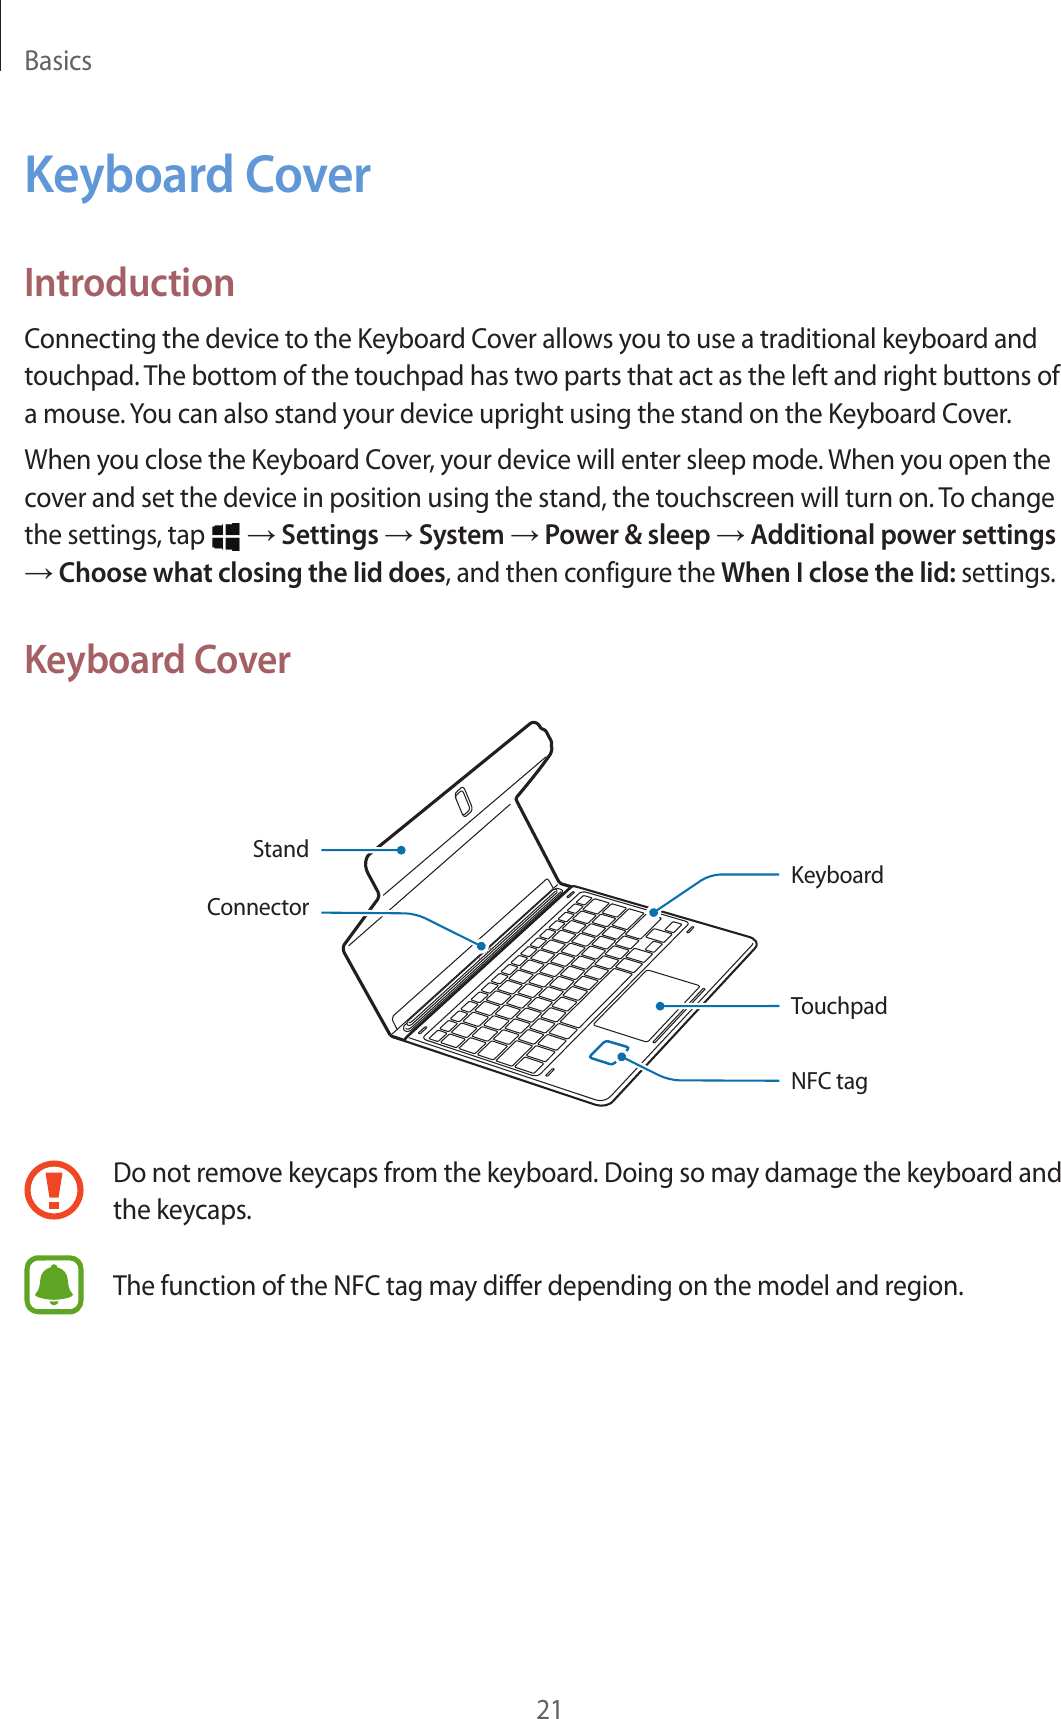 Basics21Keyboard CoverIntroductionConnecting the device to the Keyboard Cover allows you to use a traditional keyboard and touchpad. The bottom of the touchpad has two parts that act as the left and right buttons of a mouse. You can also stand your device upright using the stand on the Keyboard Cover.When you close the Keyboard Cover, your device will enter sleep mode. When you open the cover and set the device in position using the stand, the touchscreen will turn on. To change the settings, tap   → Settings → System → Power &amp; sleep → Additional power settings → Choose what closing the lid does, and then configure the When I close the lid: settings.Keyboard CoverConnectorKeyboardTouchpadNFC tagStandDo not remove keycaps from the keyboard. Doing so may damage the keyboard and the keycaps.The function of the NFC tag may differ depending on the model and region.